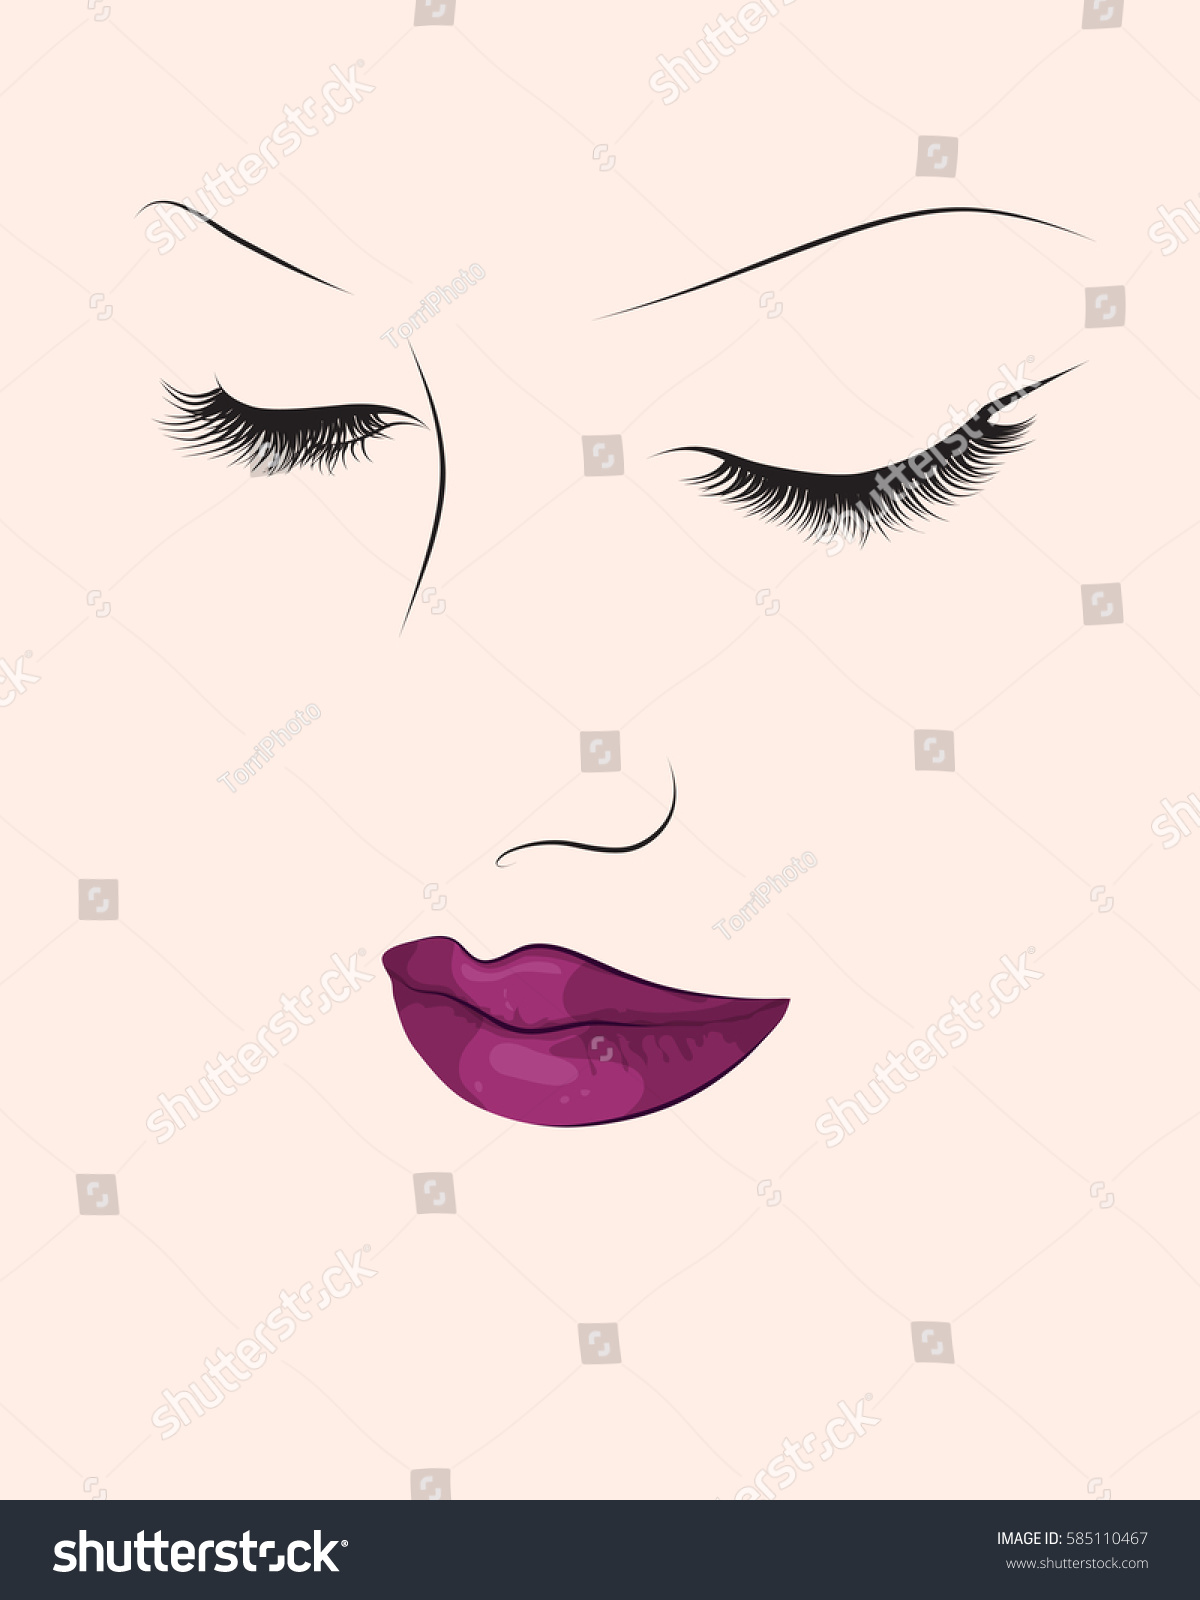 https://www.shutterstock.com/image-vector/make-fashion-portrait-abstract-colorful-woman-585110467